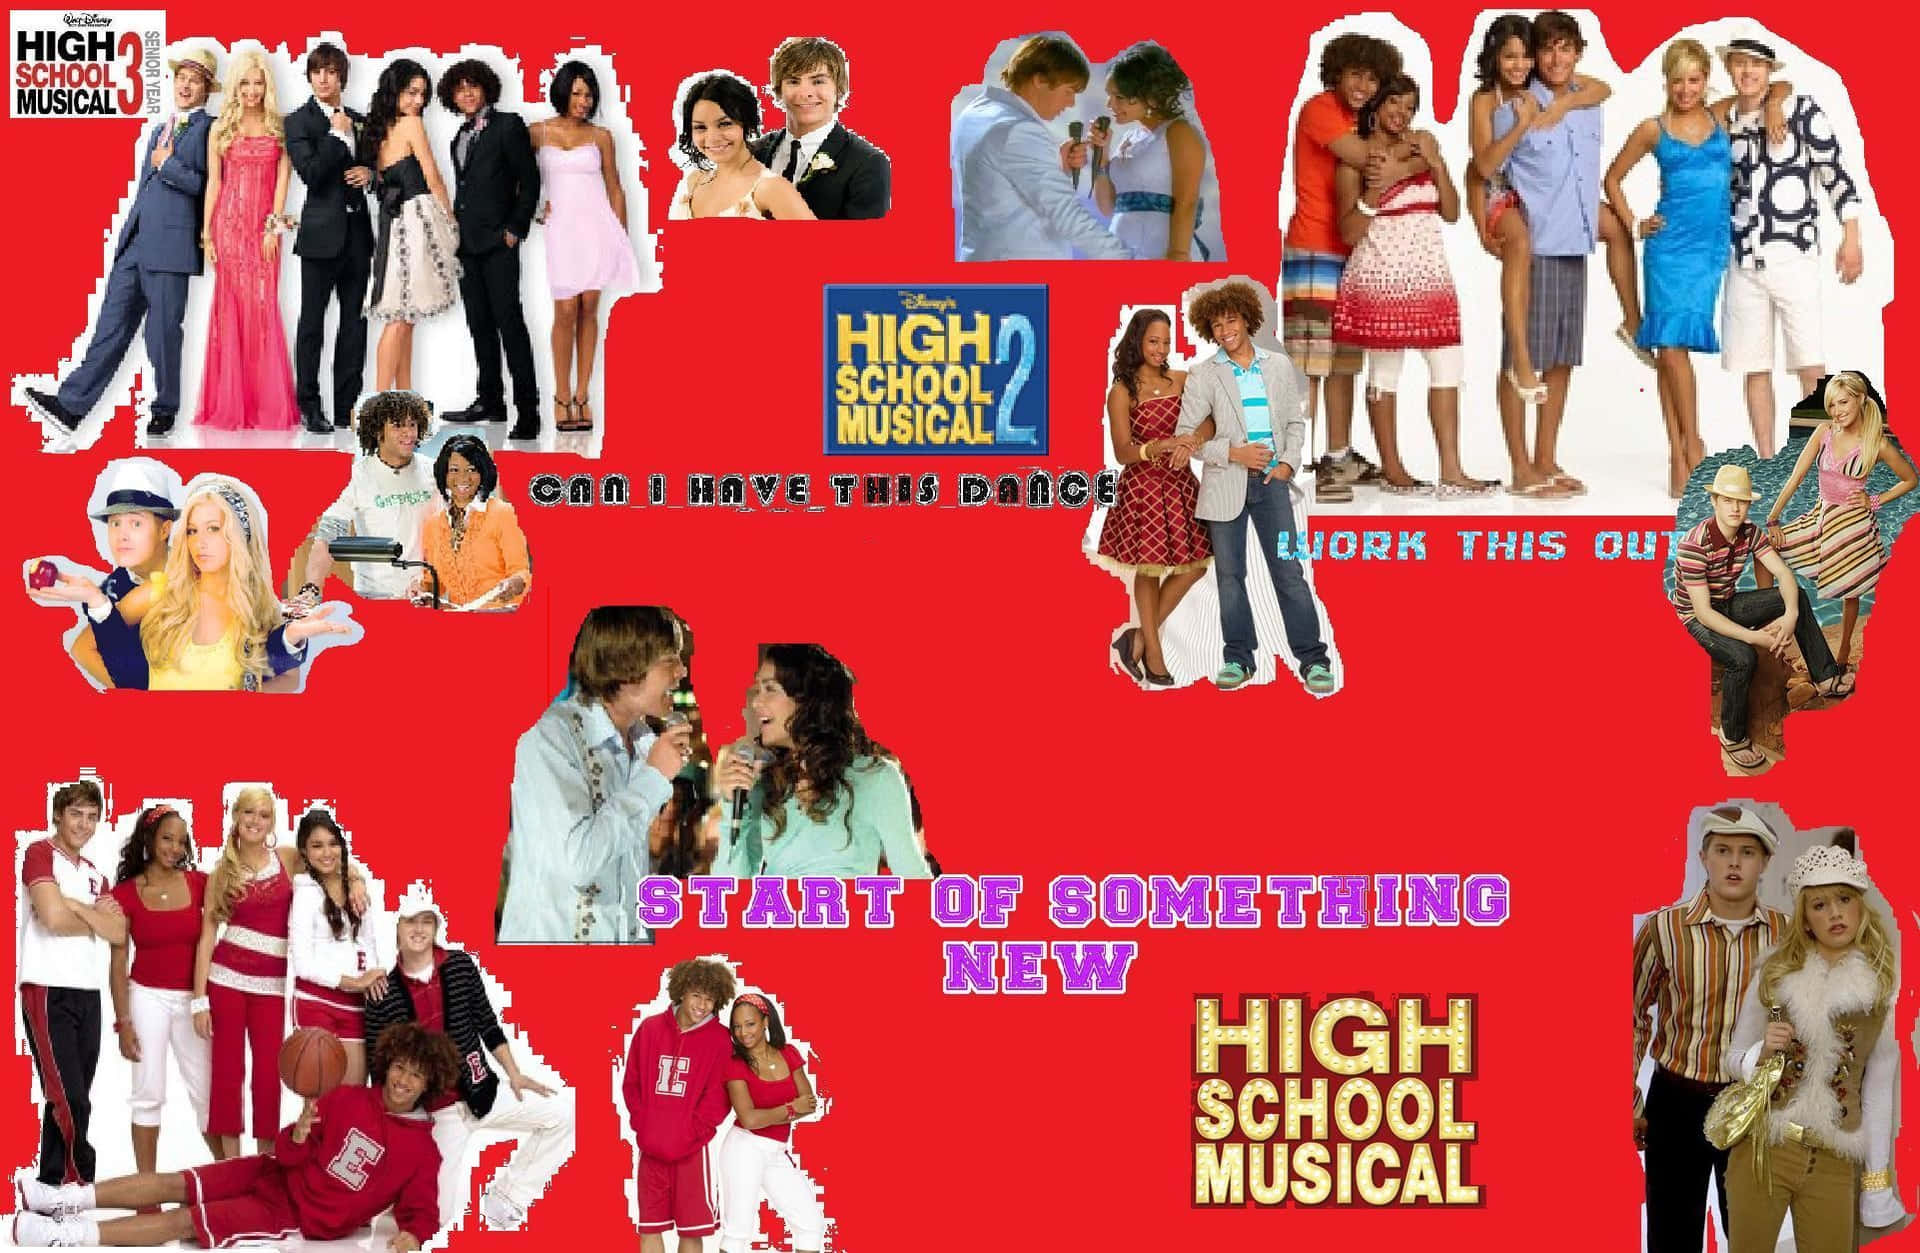 High School Musical Cast on Stage